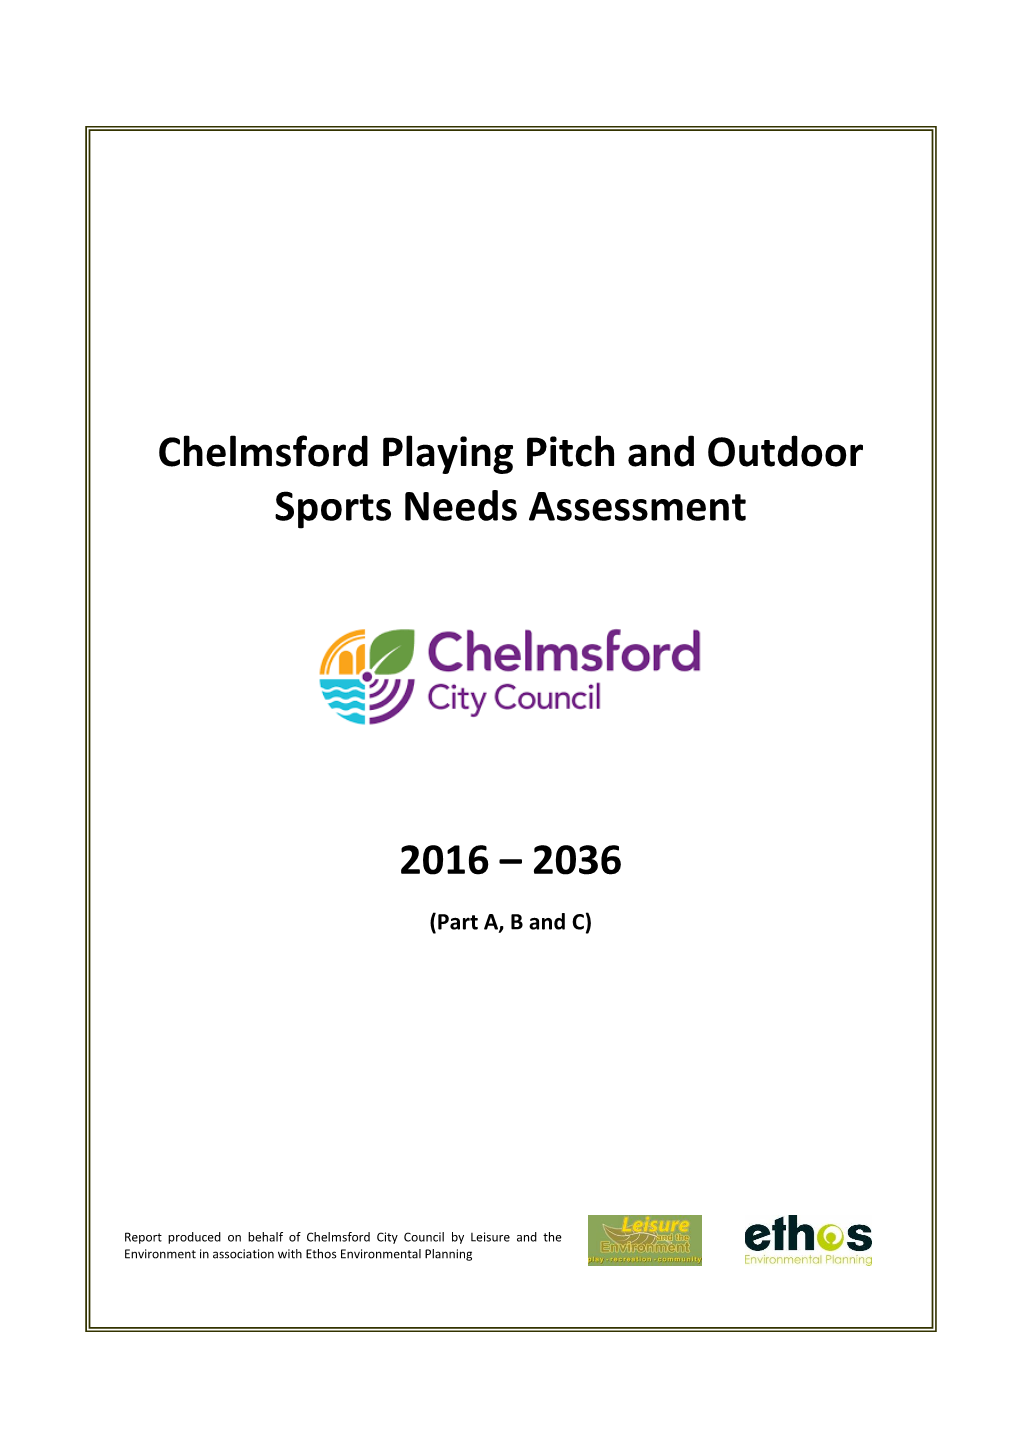 Chelmsford Playing Pitch and Outdoor Sports Needs Assessment 2016